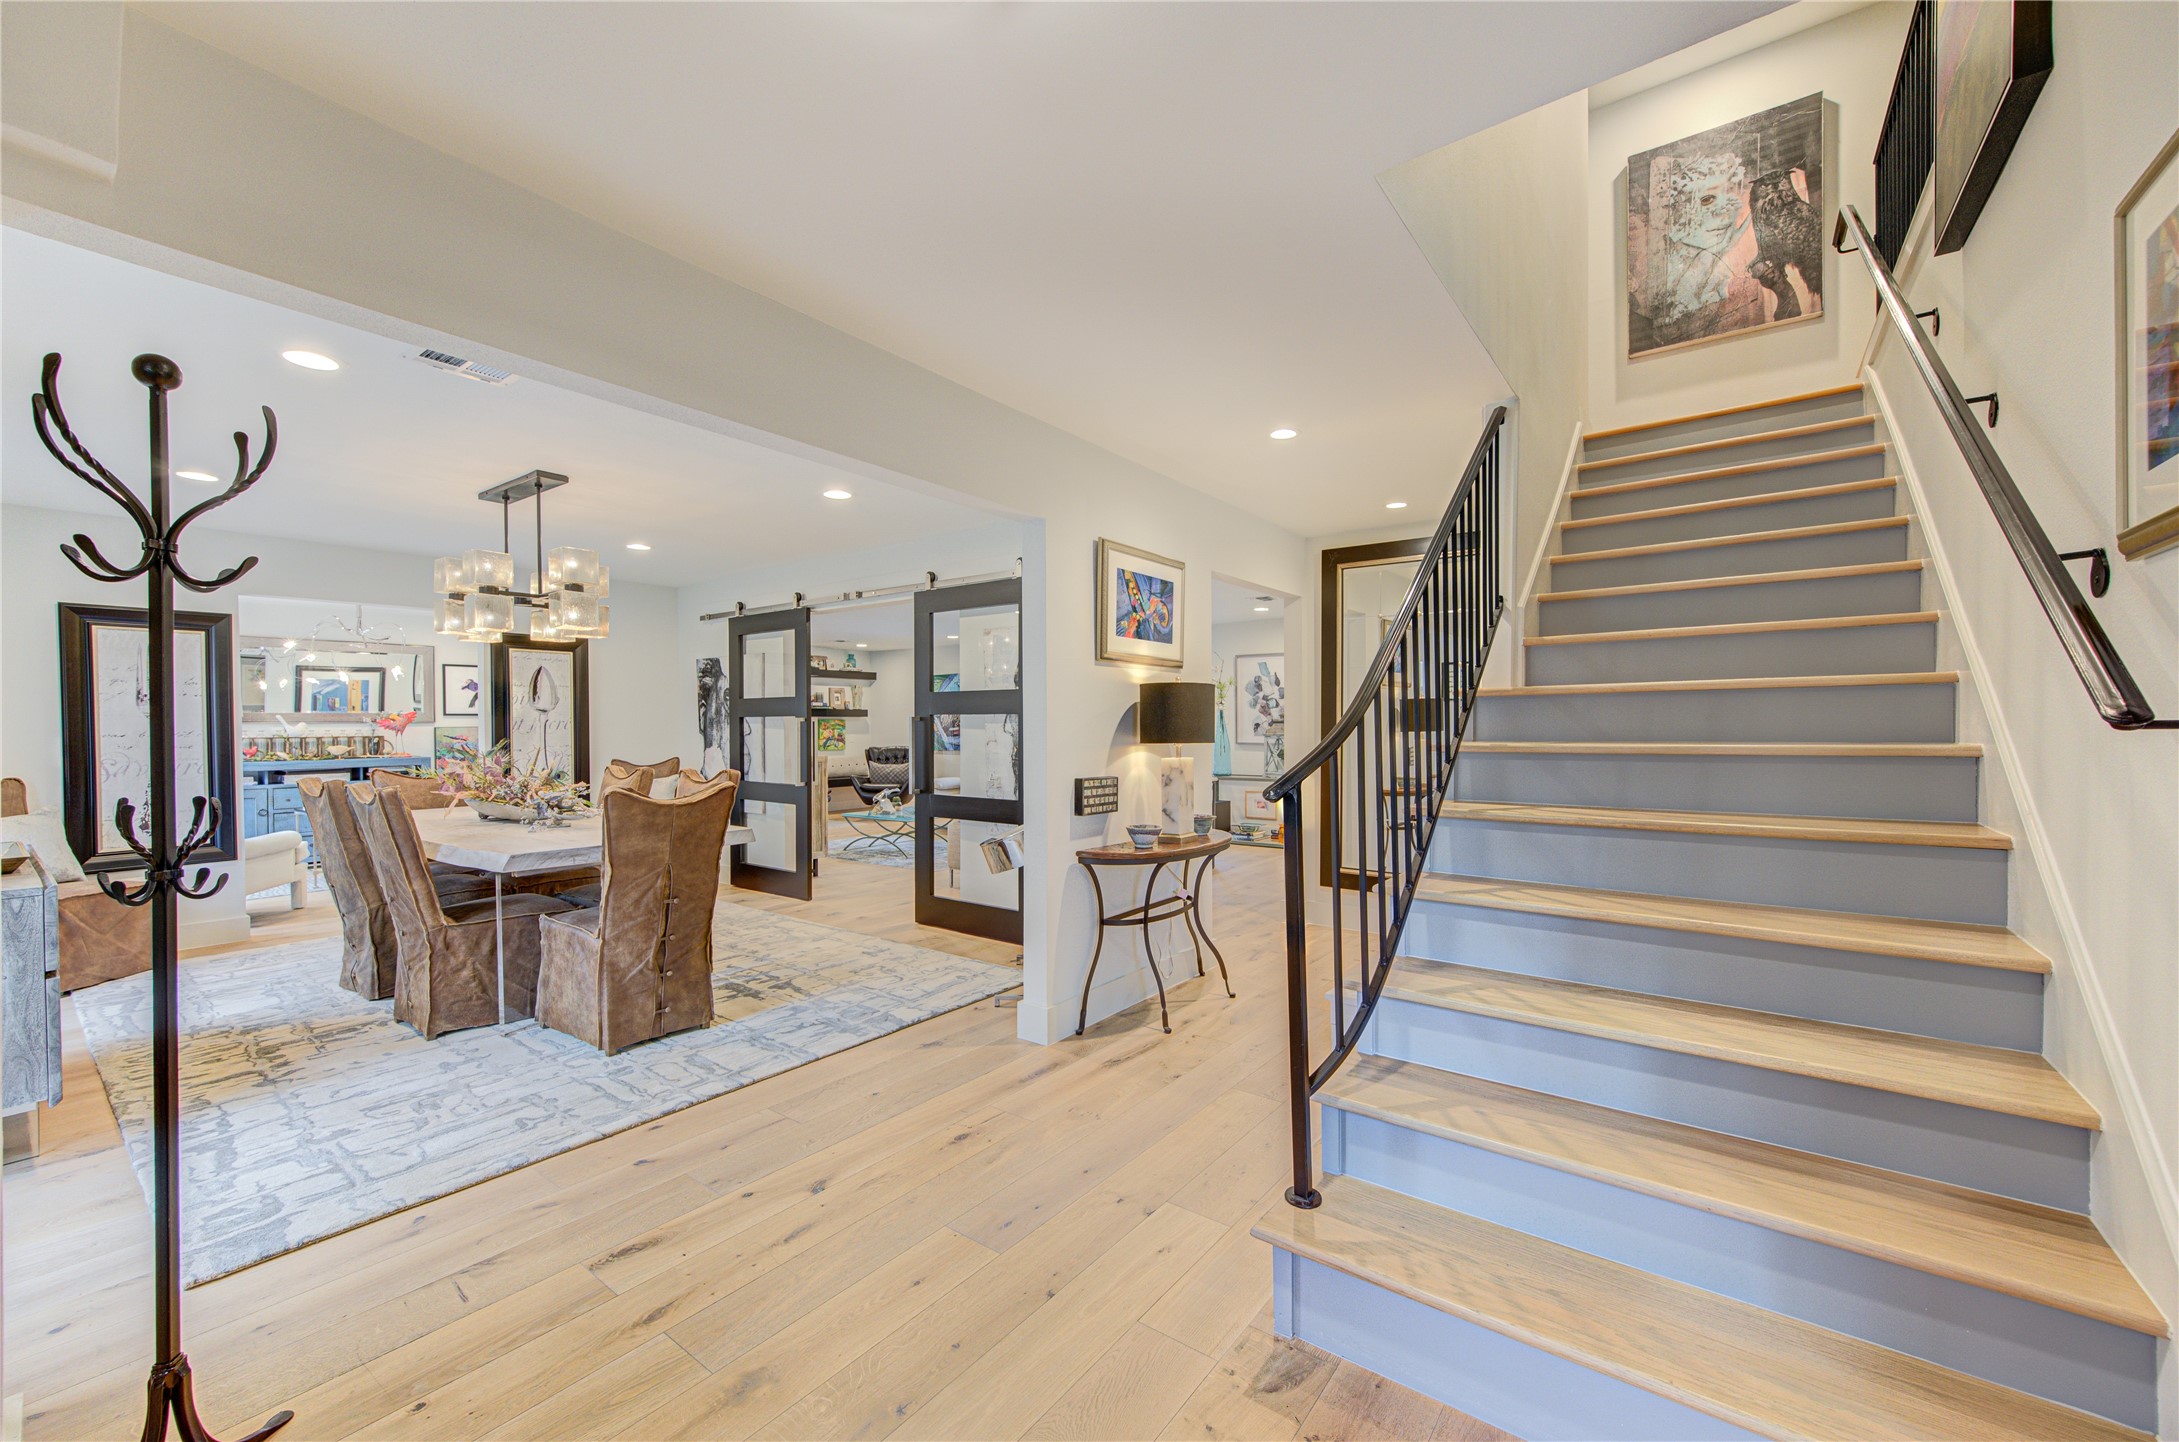 The double iron front doors and French Oak floors are what everyone buyer is looking for, and this home has it all!